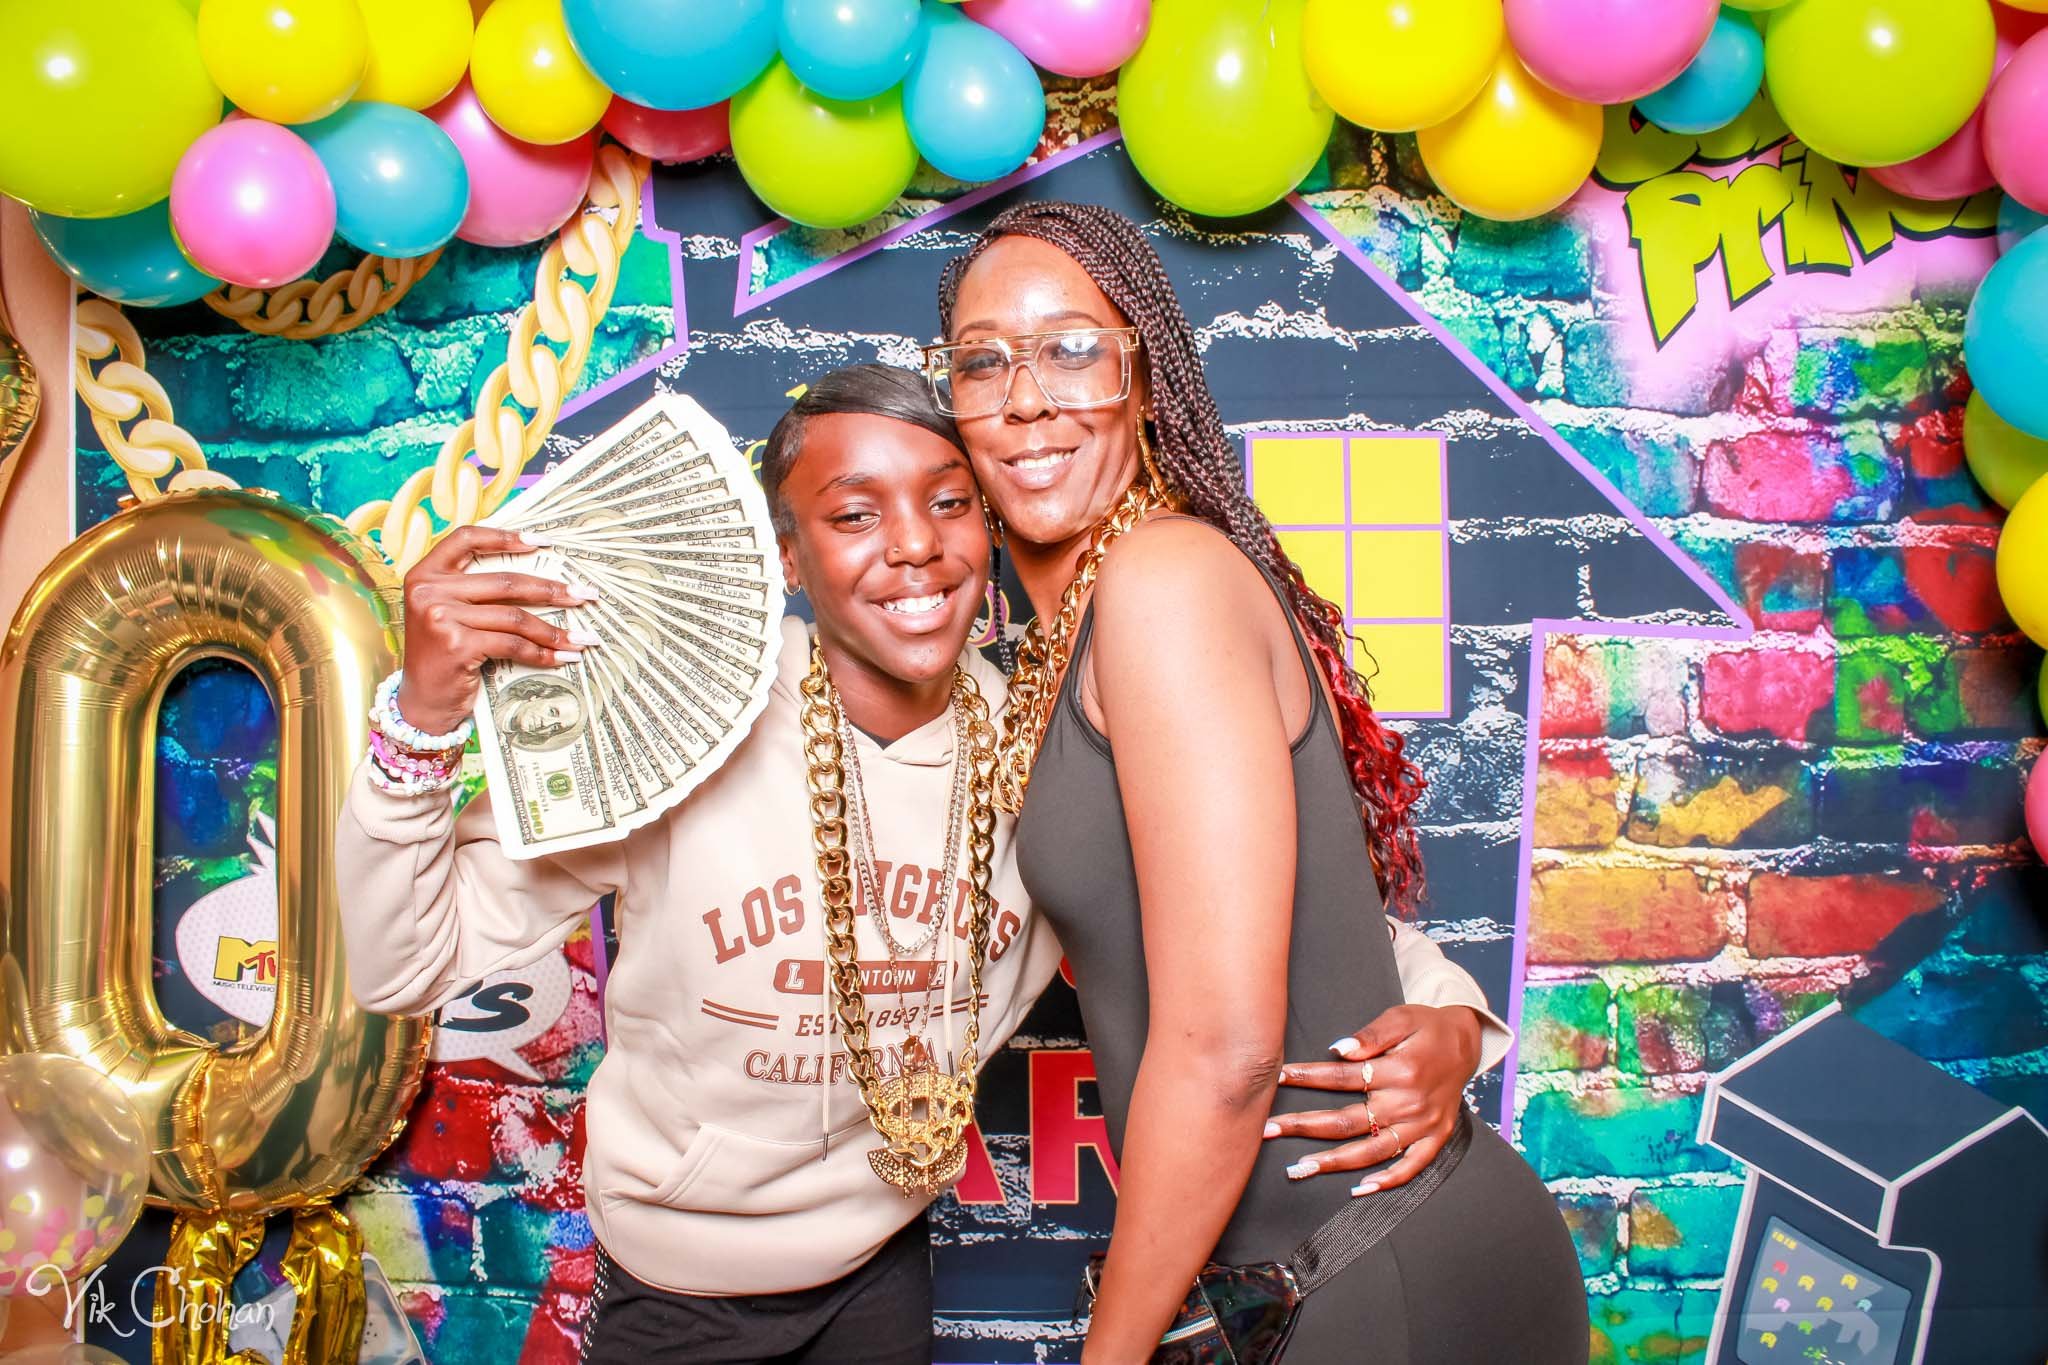 2022-11-26-Fabreonne-40-and-Fabulous-Birthday-House-Party-Photo-Booth-Vik-Chohan-Photography-Photo-Booth-Social-Media-VCP-010.jpg